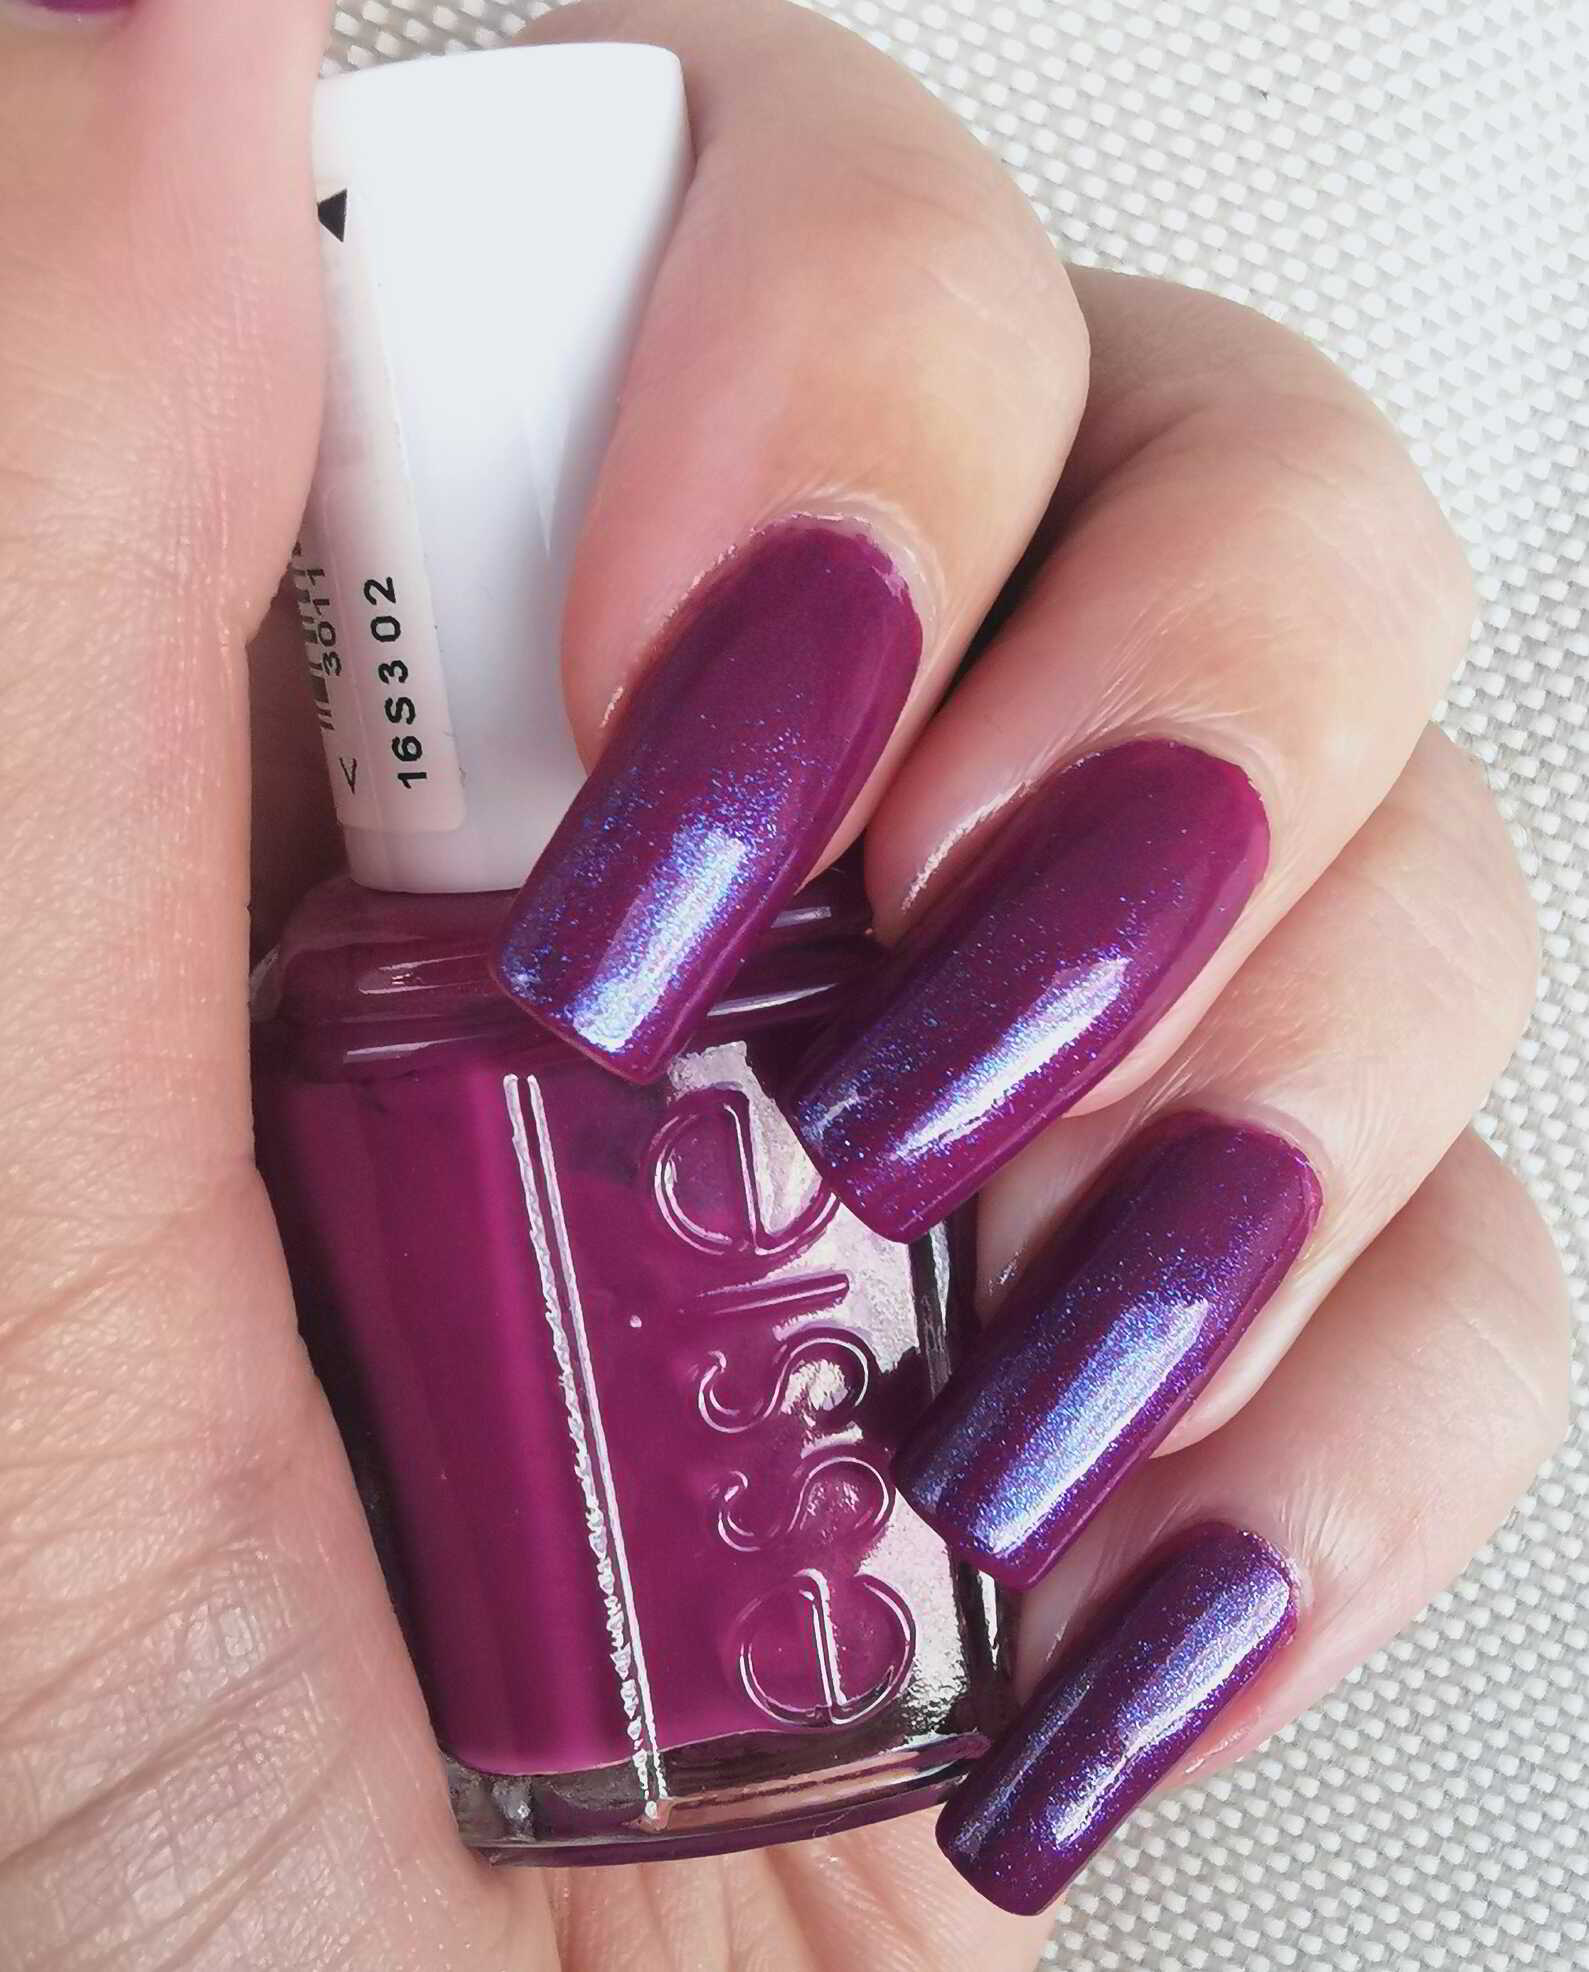 Nail polish manicure of shade essie Flowerista, Catrice Feel The Cosmic Vibe, 